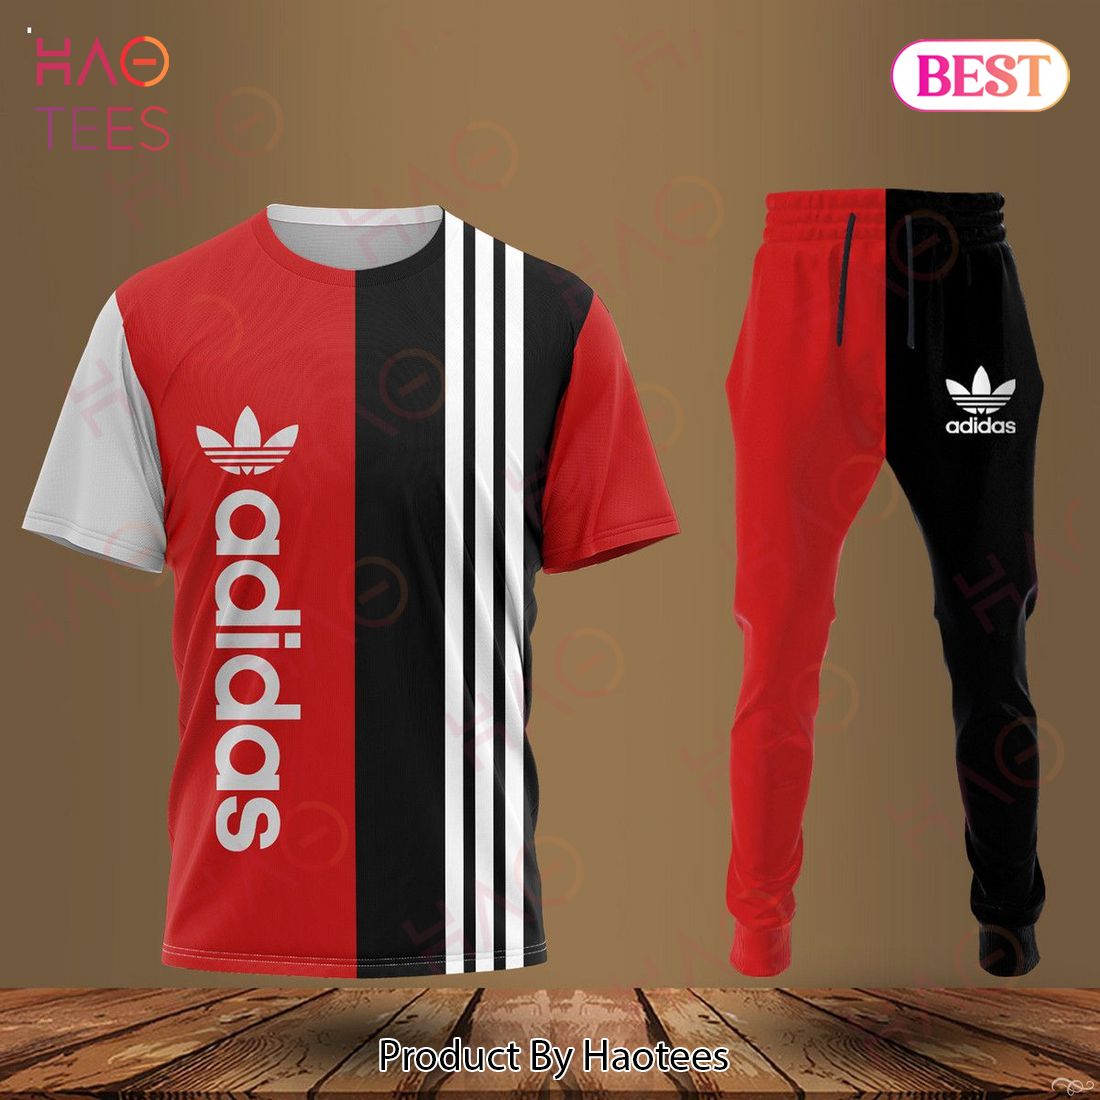 Adidas Black Mix Red T-Shirt And Pants Luxury Brand Limited Edition